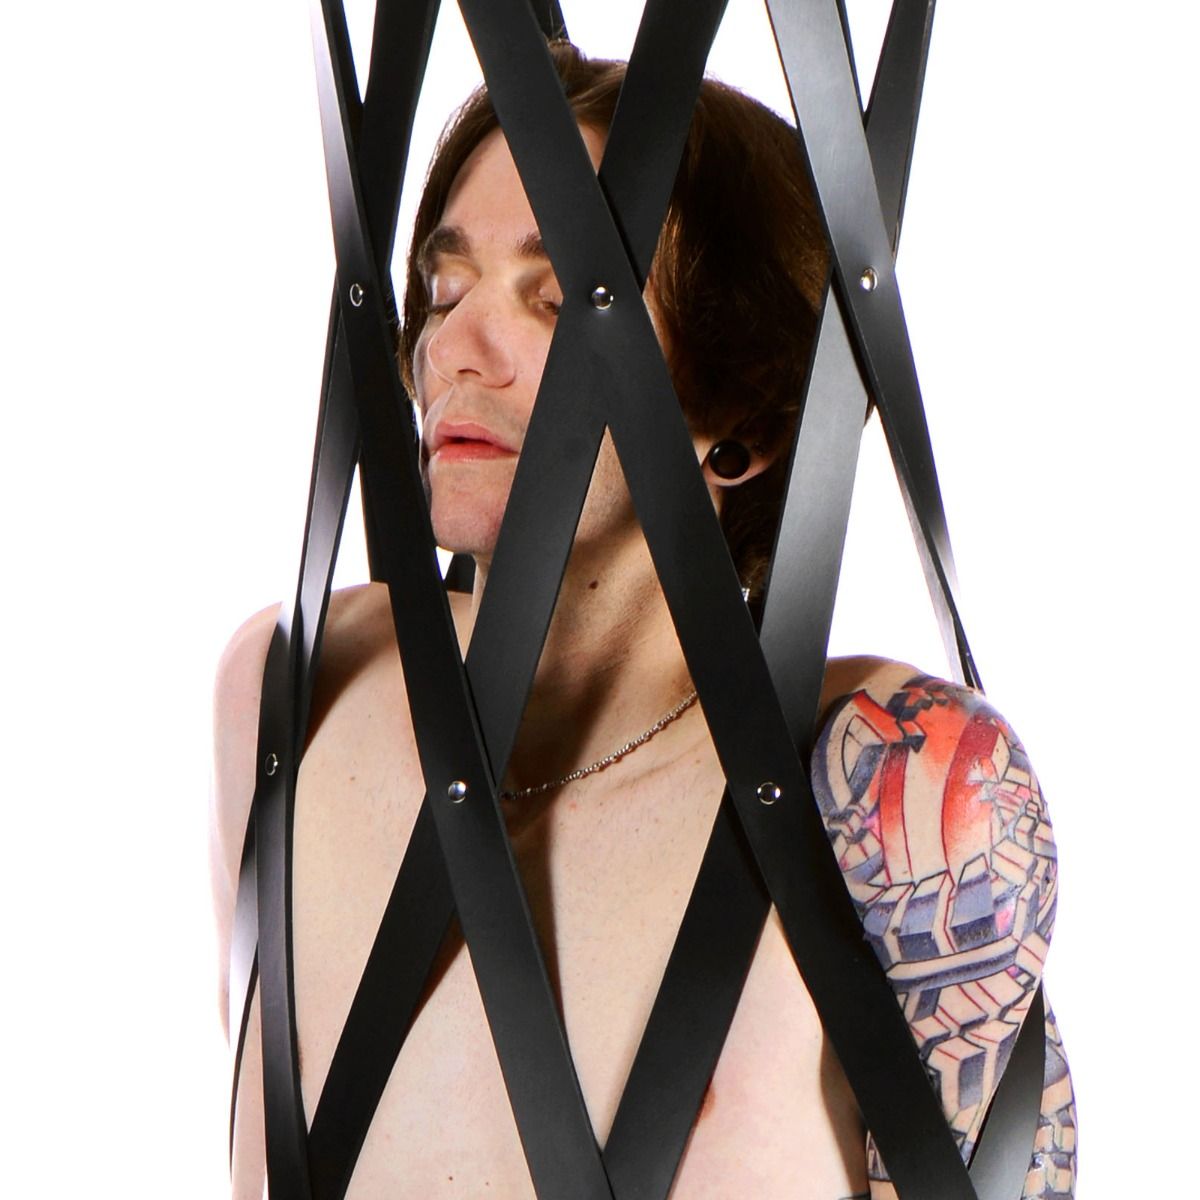 MASTER SERIES Hanging Rubber Strap Cage